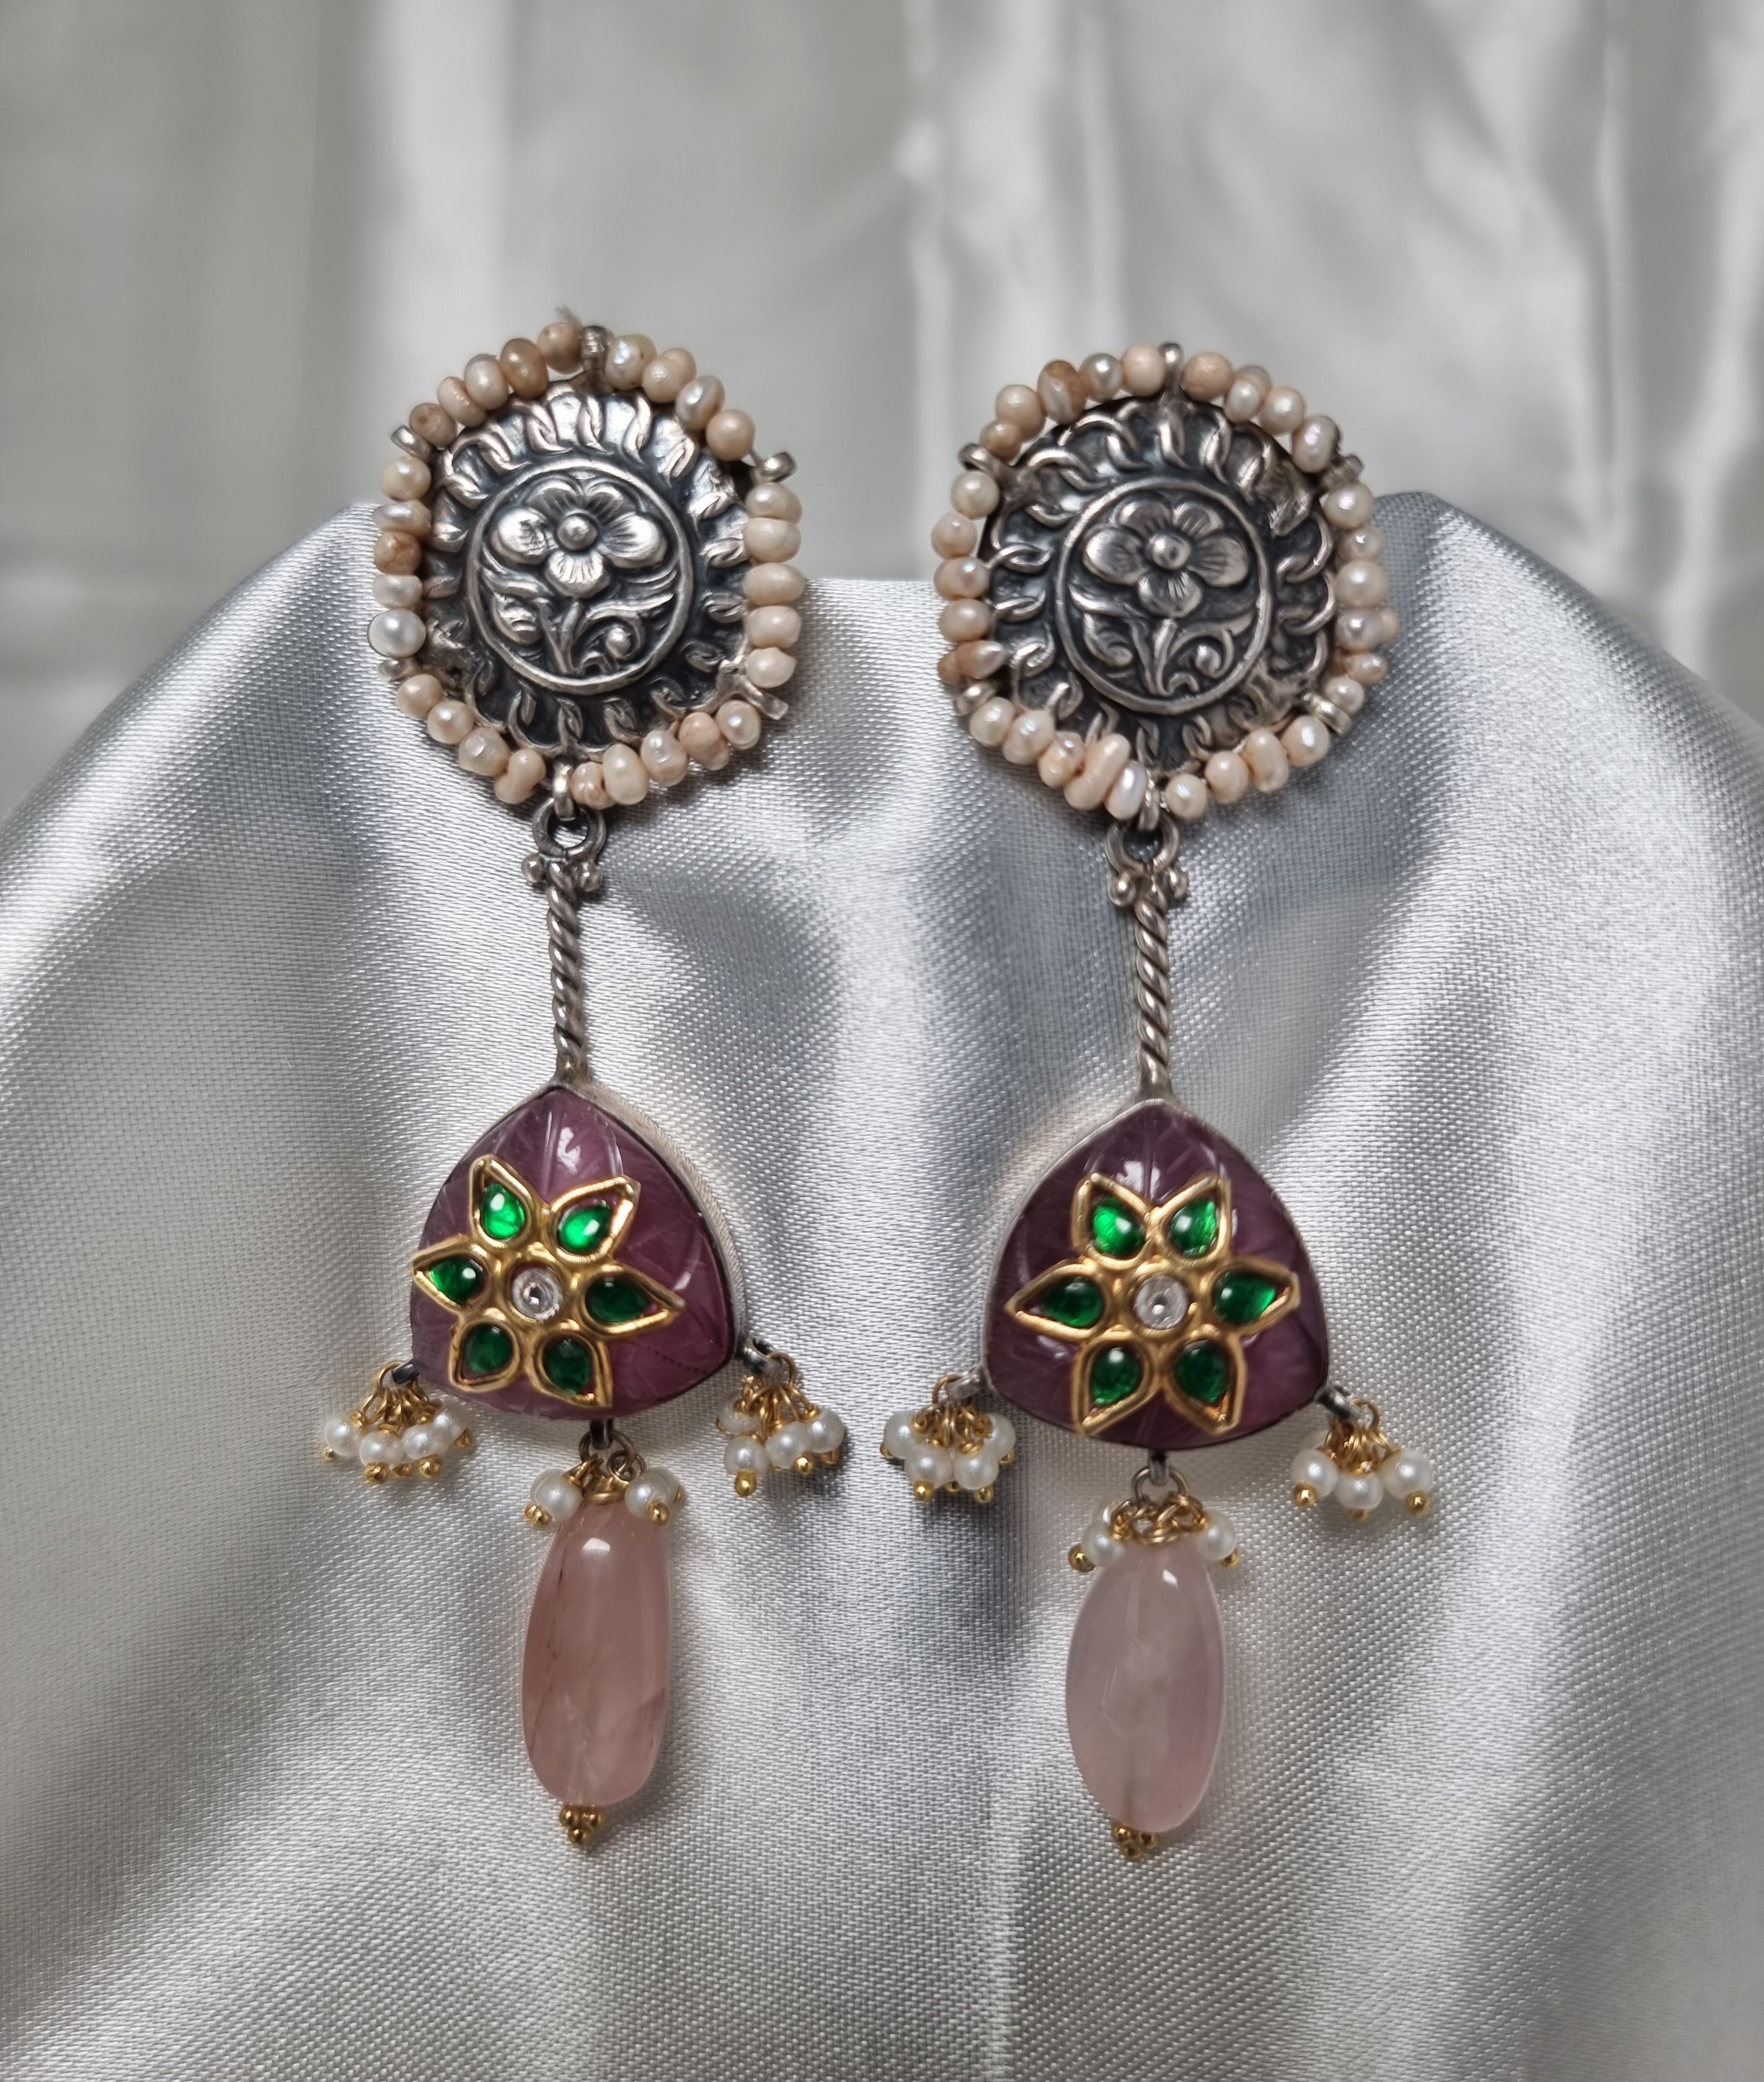 Fancy Designer Polished Finish Peacock Design Clip On Silver Earrings  Gender: Women at Best Price in Mumbai | Siddhivinayak Trading